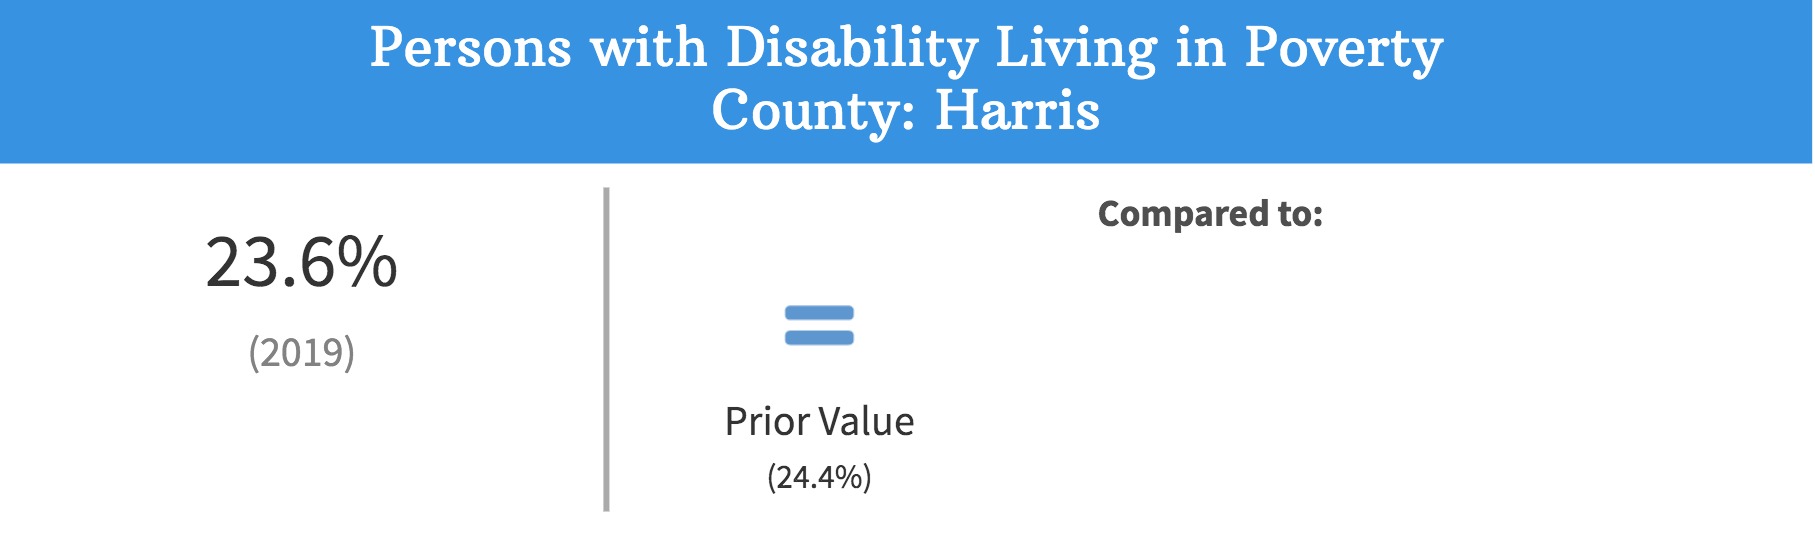 Persons_with_Disability_Living_in_Poverty_County__Harris.jpg